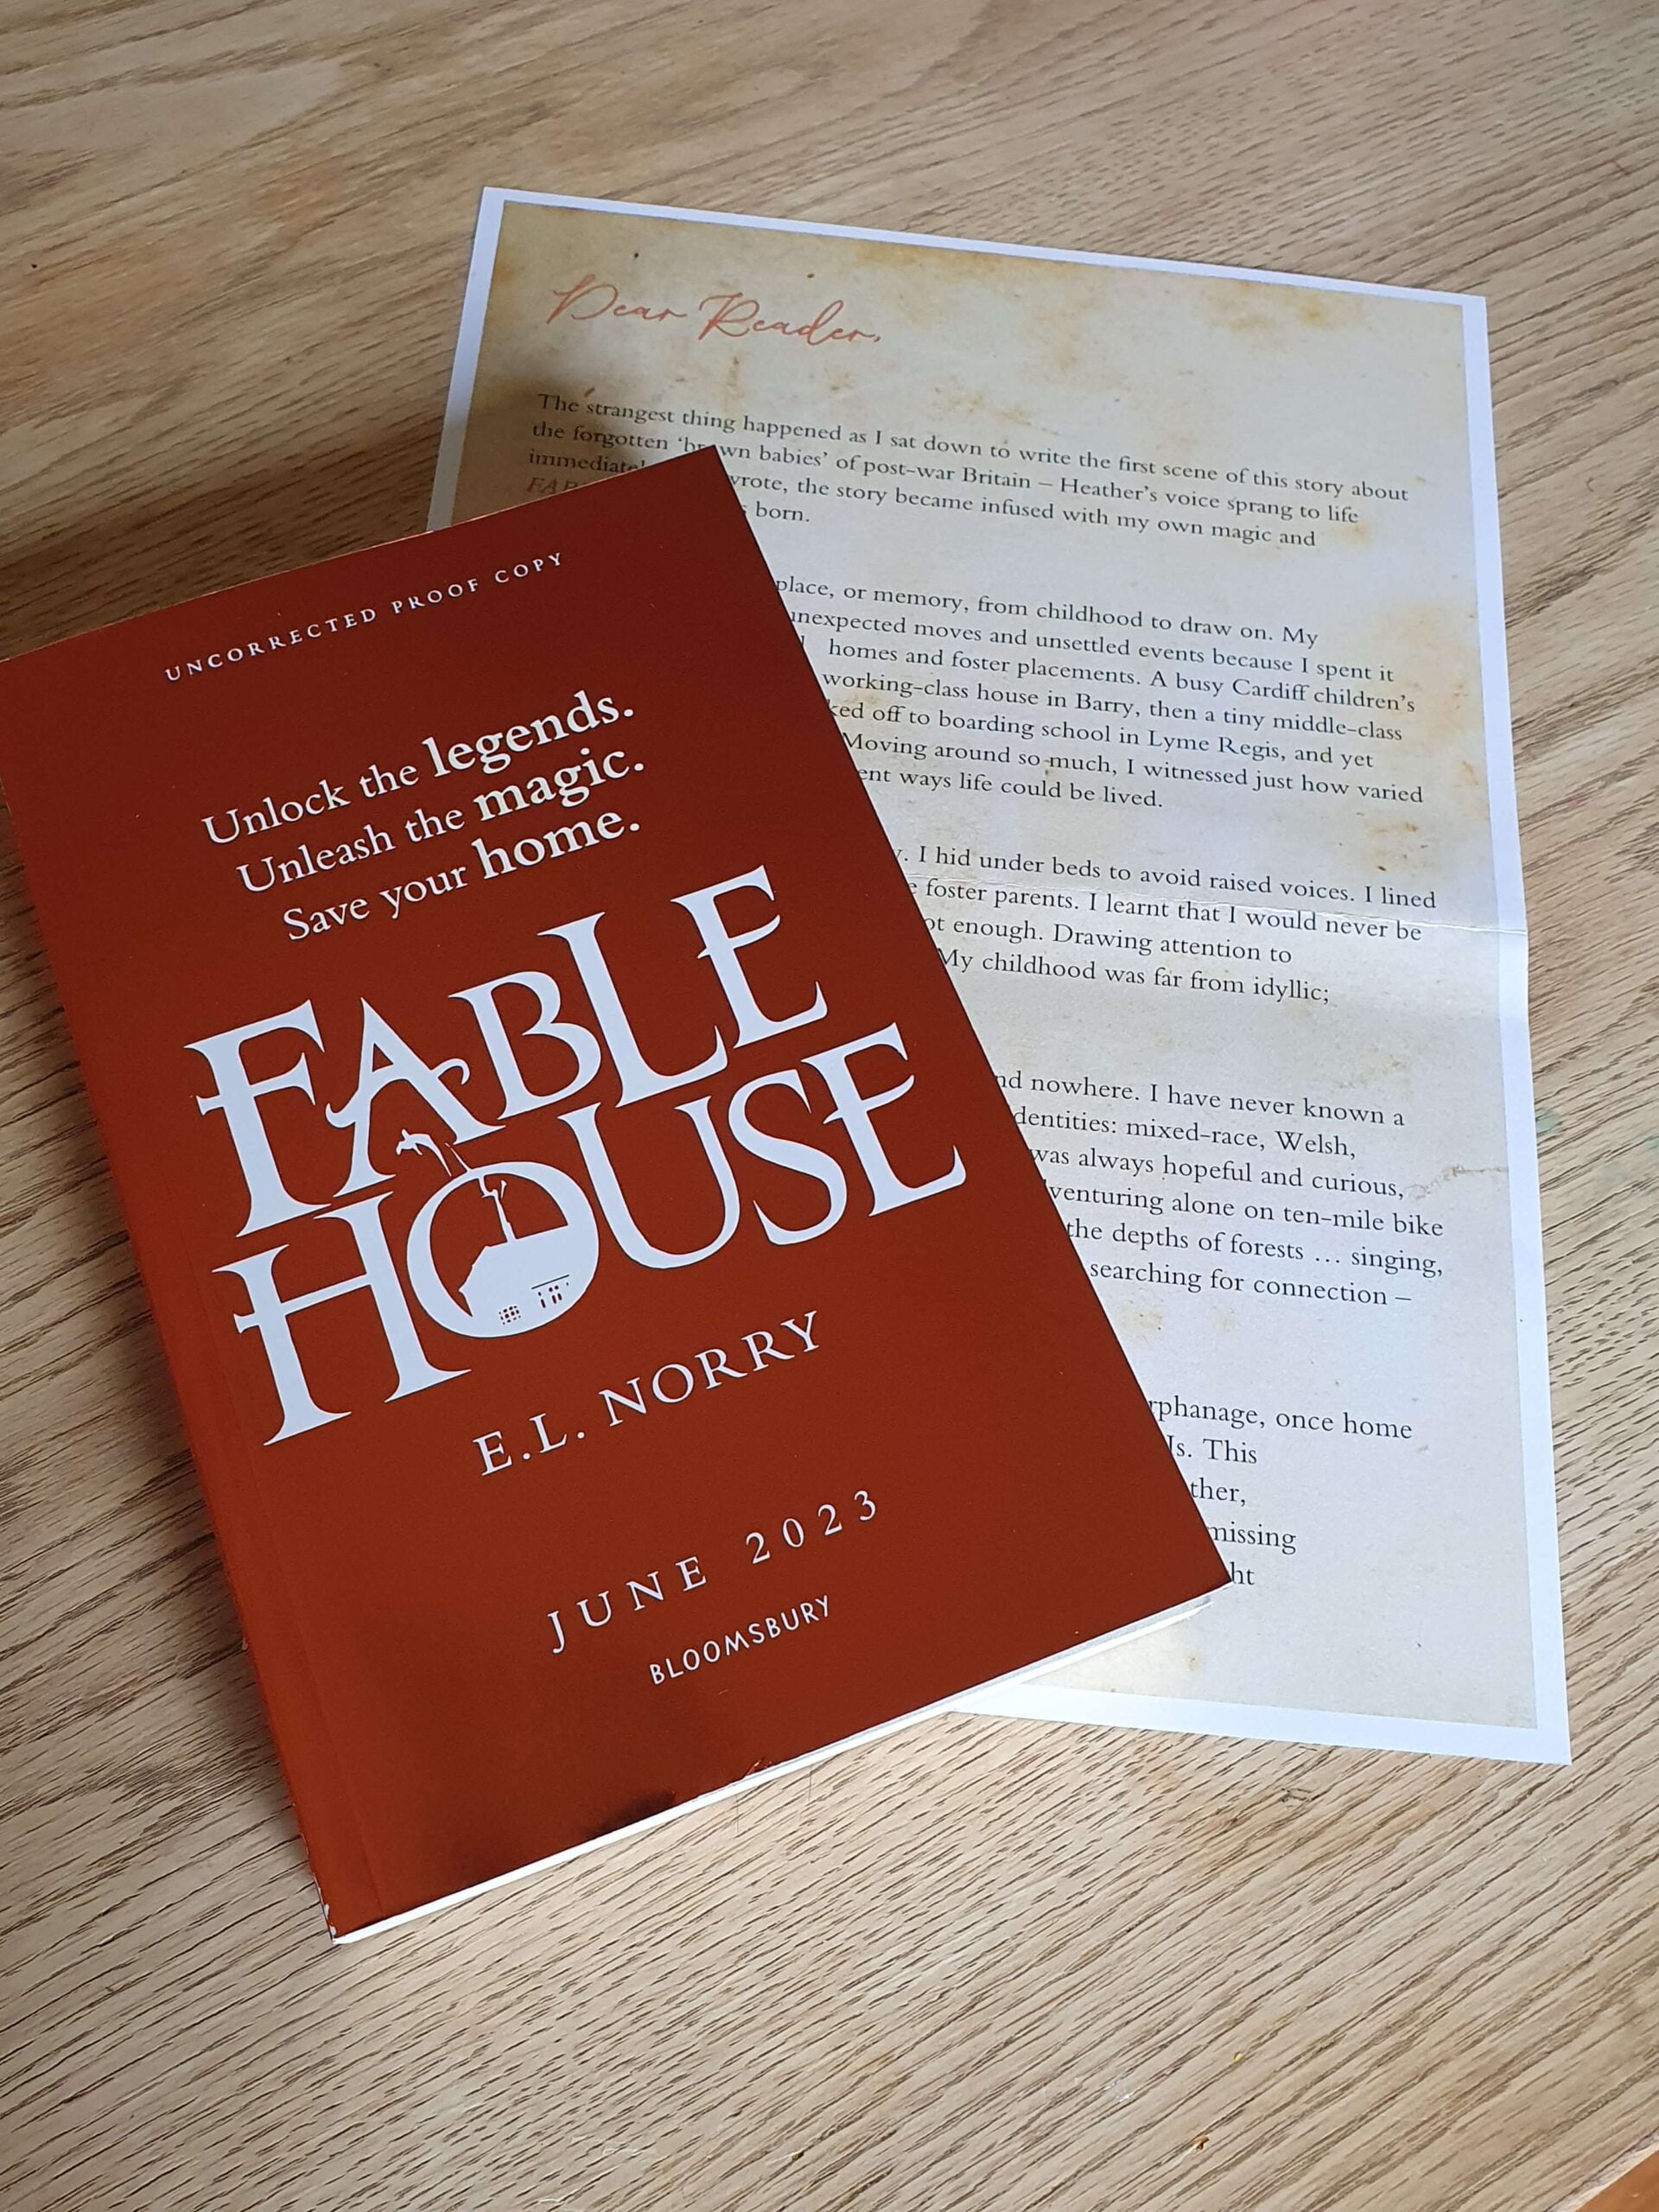 A photo of Fablehouse book proof cover and accompanying author letter.